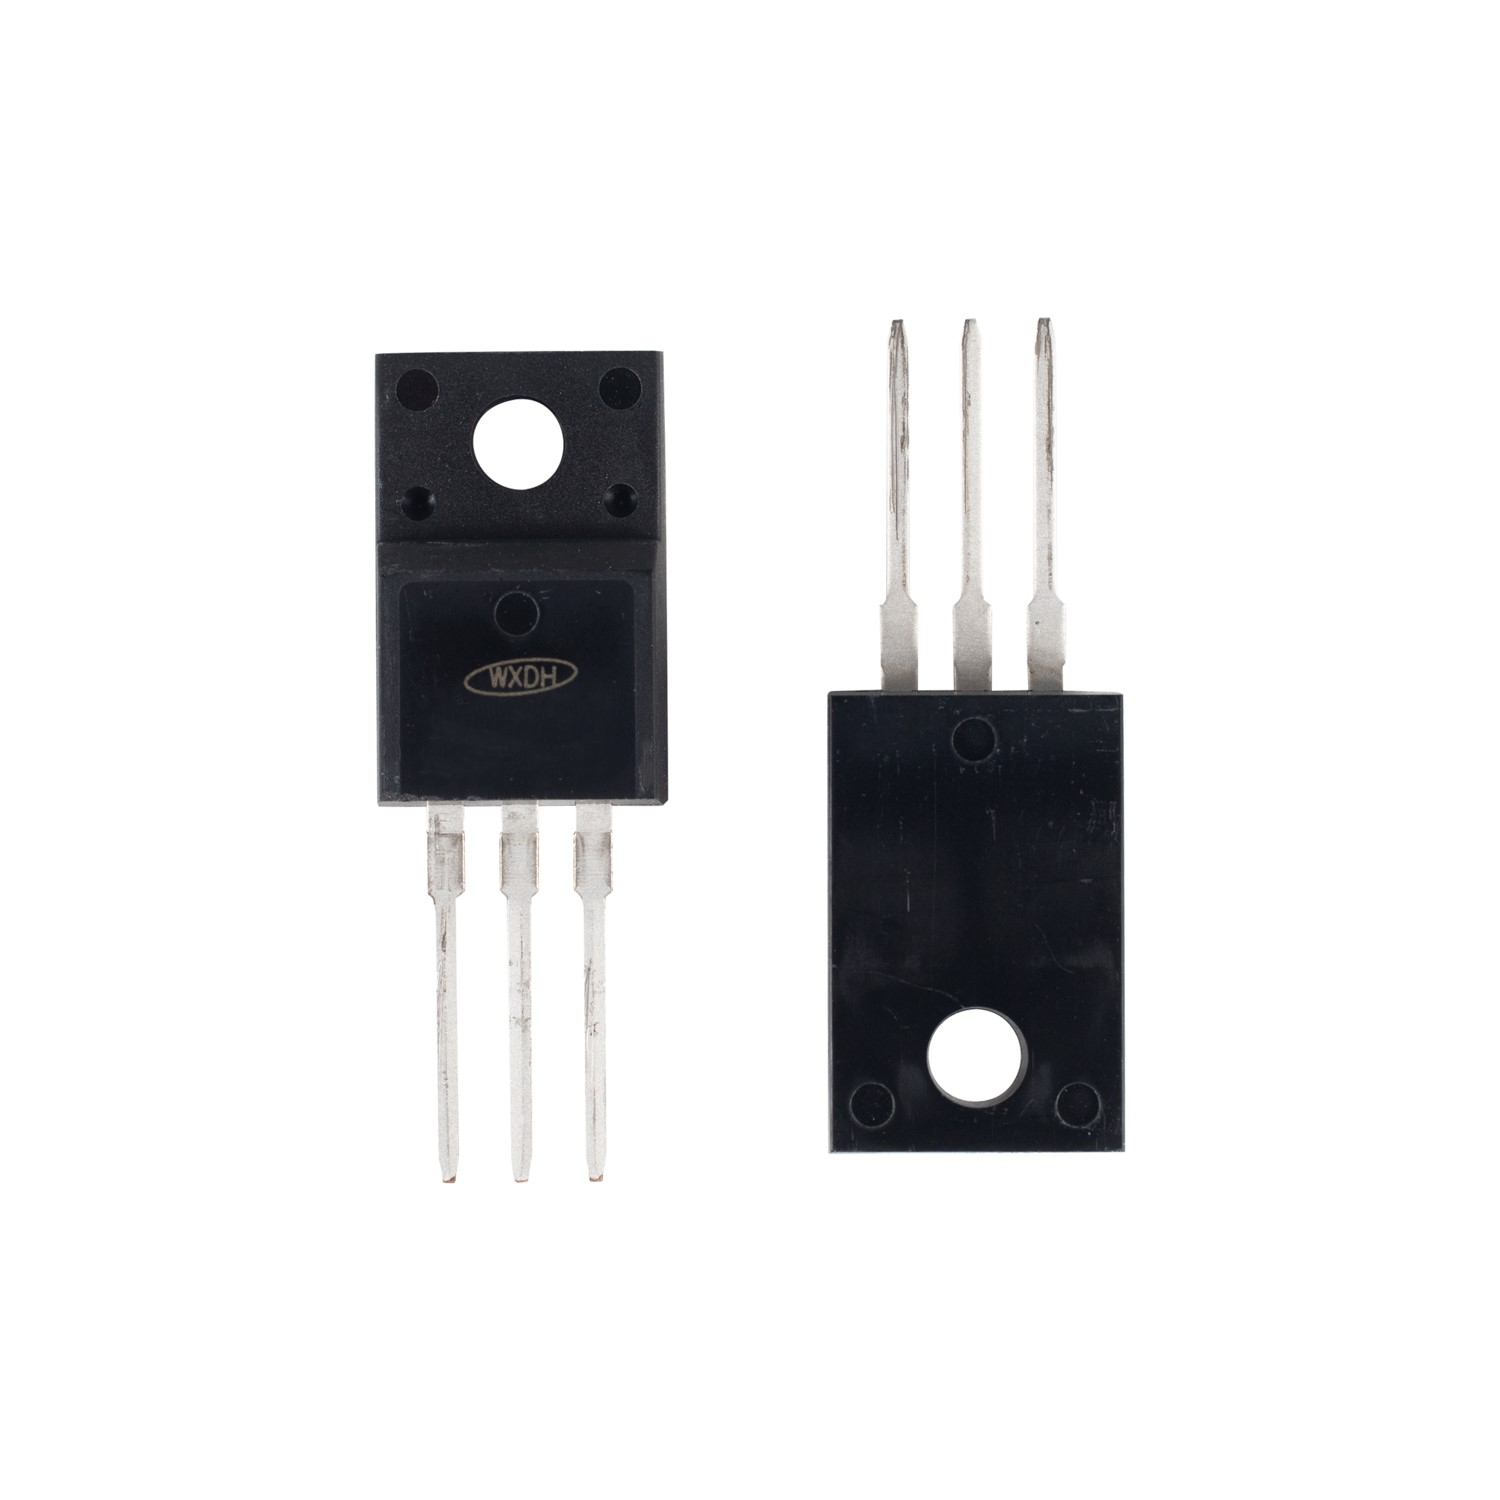 20A 200V LOW VF Schottky Barrier Diode MBRF20R200CT TO-220F